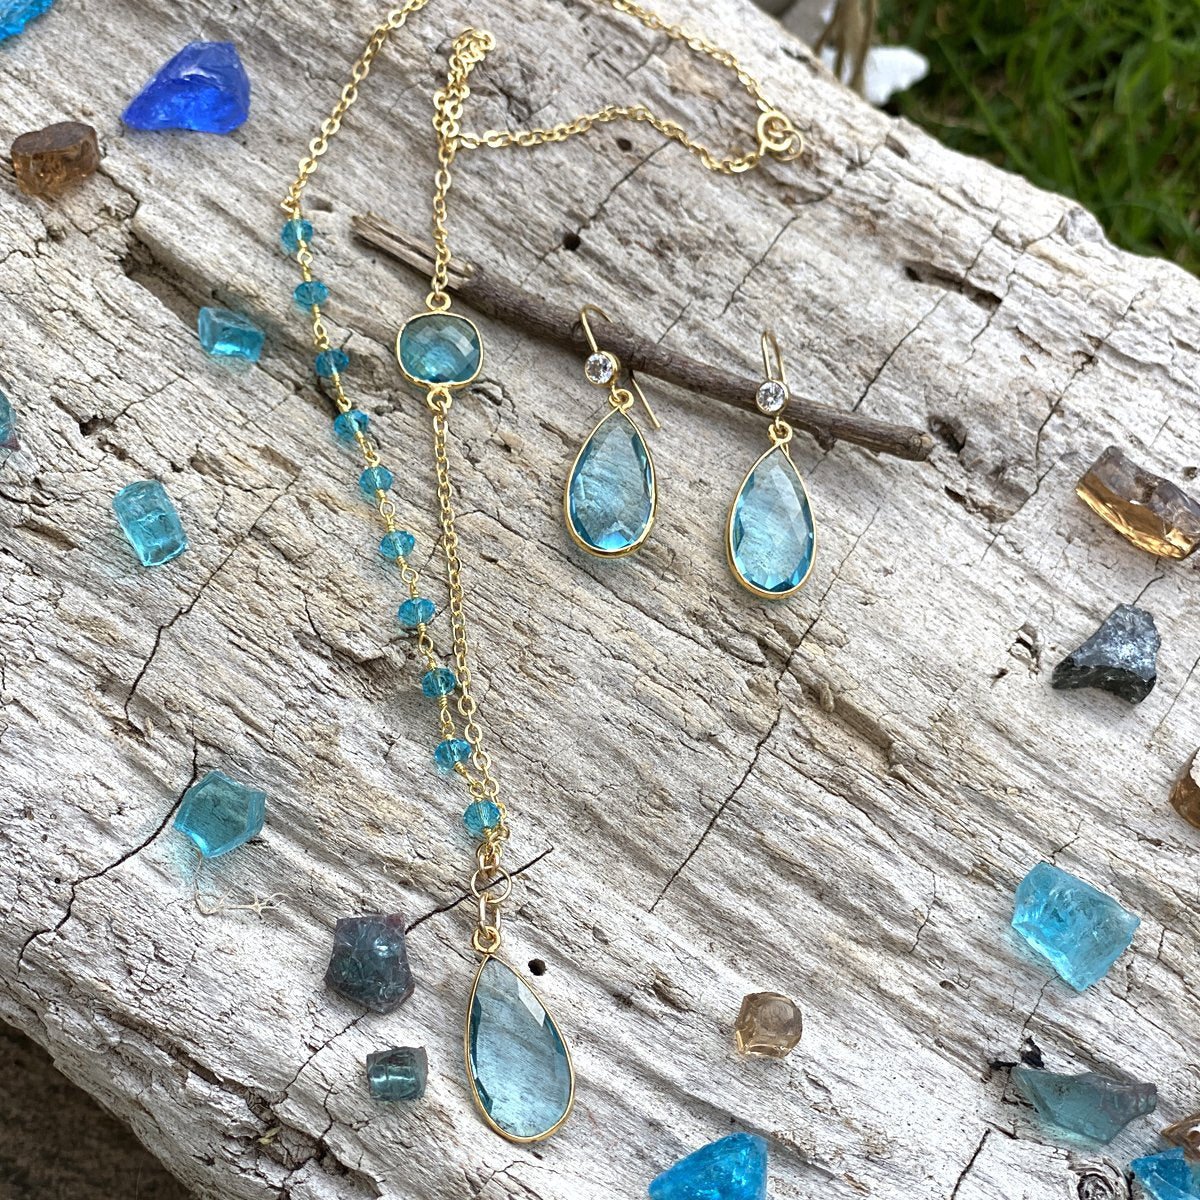 Asymmetrical Aquamarine Crystal Necklace and Earrings for Courage